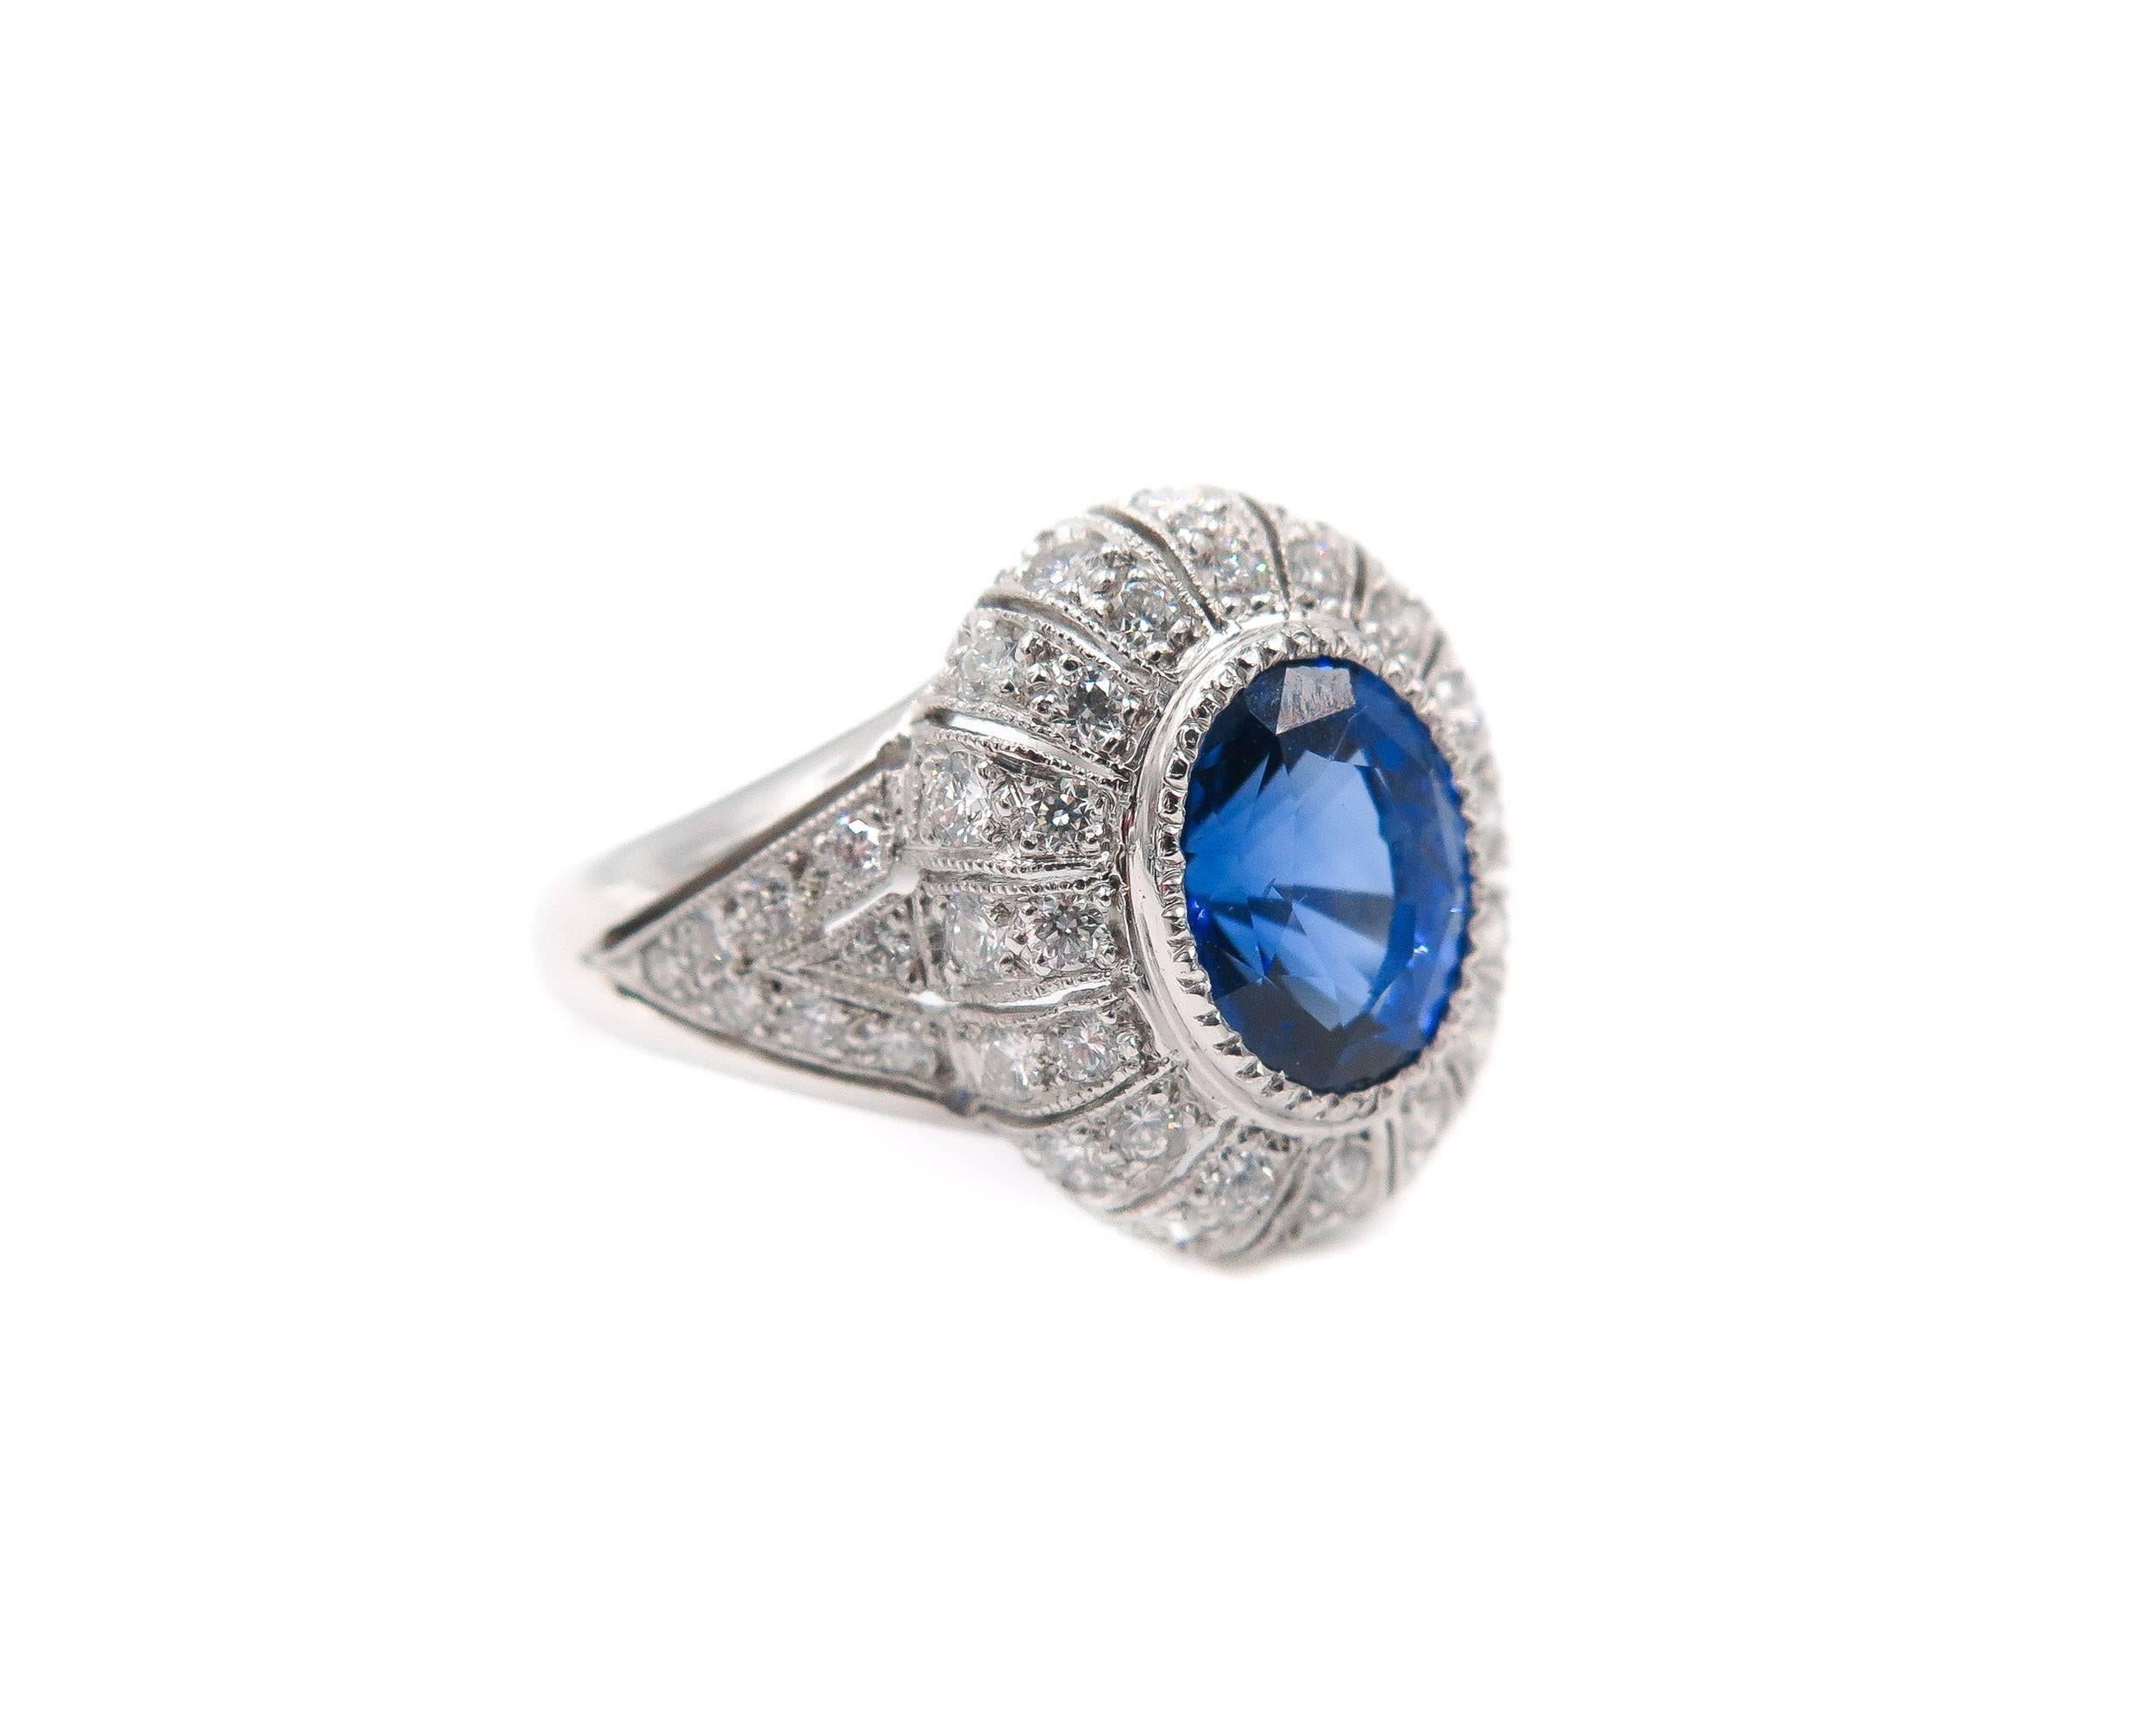 A stunning platinum cocktail ring featuring a 3.26 carat oval shaped blue sapphire set in an amazing vintage style, handcrafted, setting encrusted with 1.12 carats of round brilliant-cut diamonds. 
The ring is currently a size 7 with room to size up